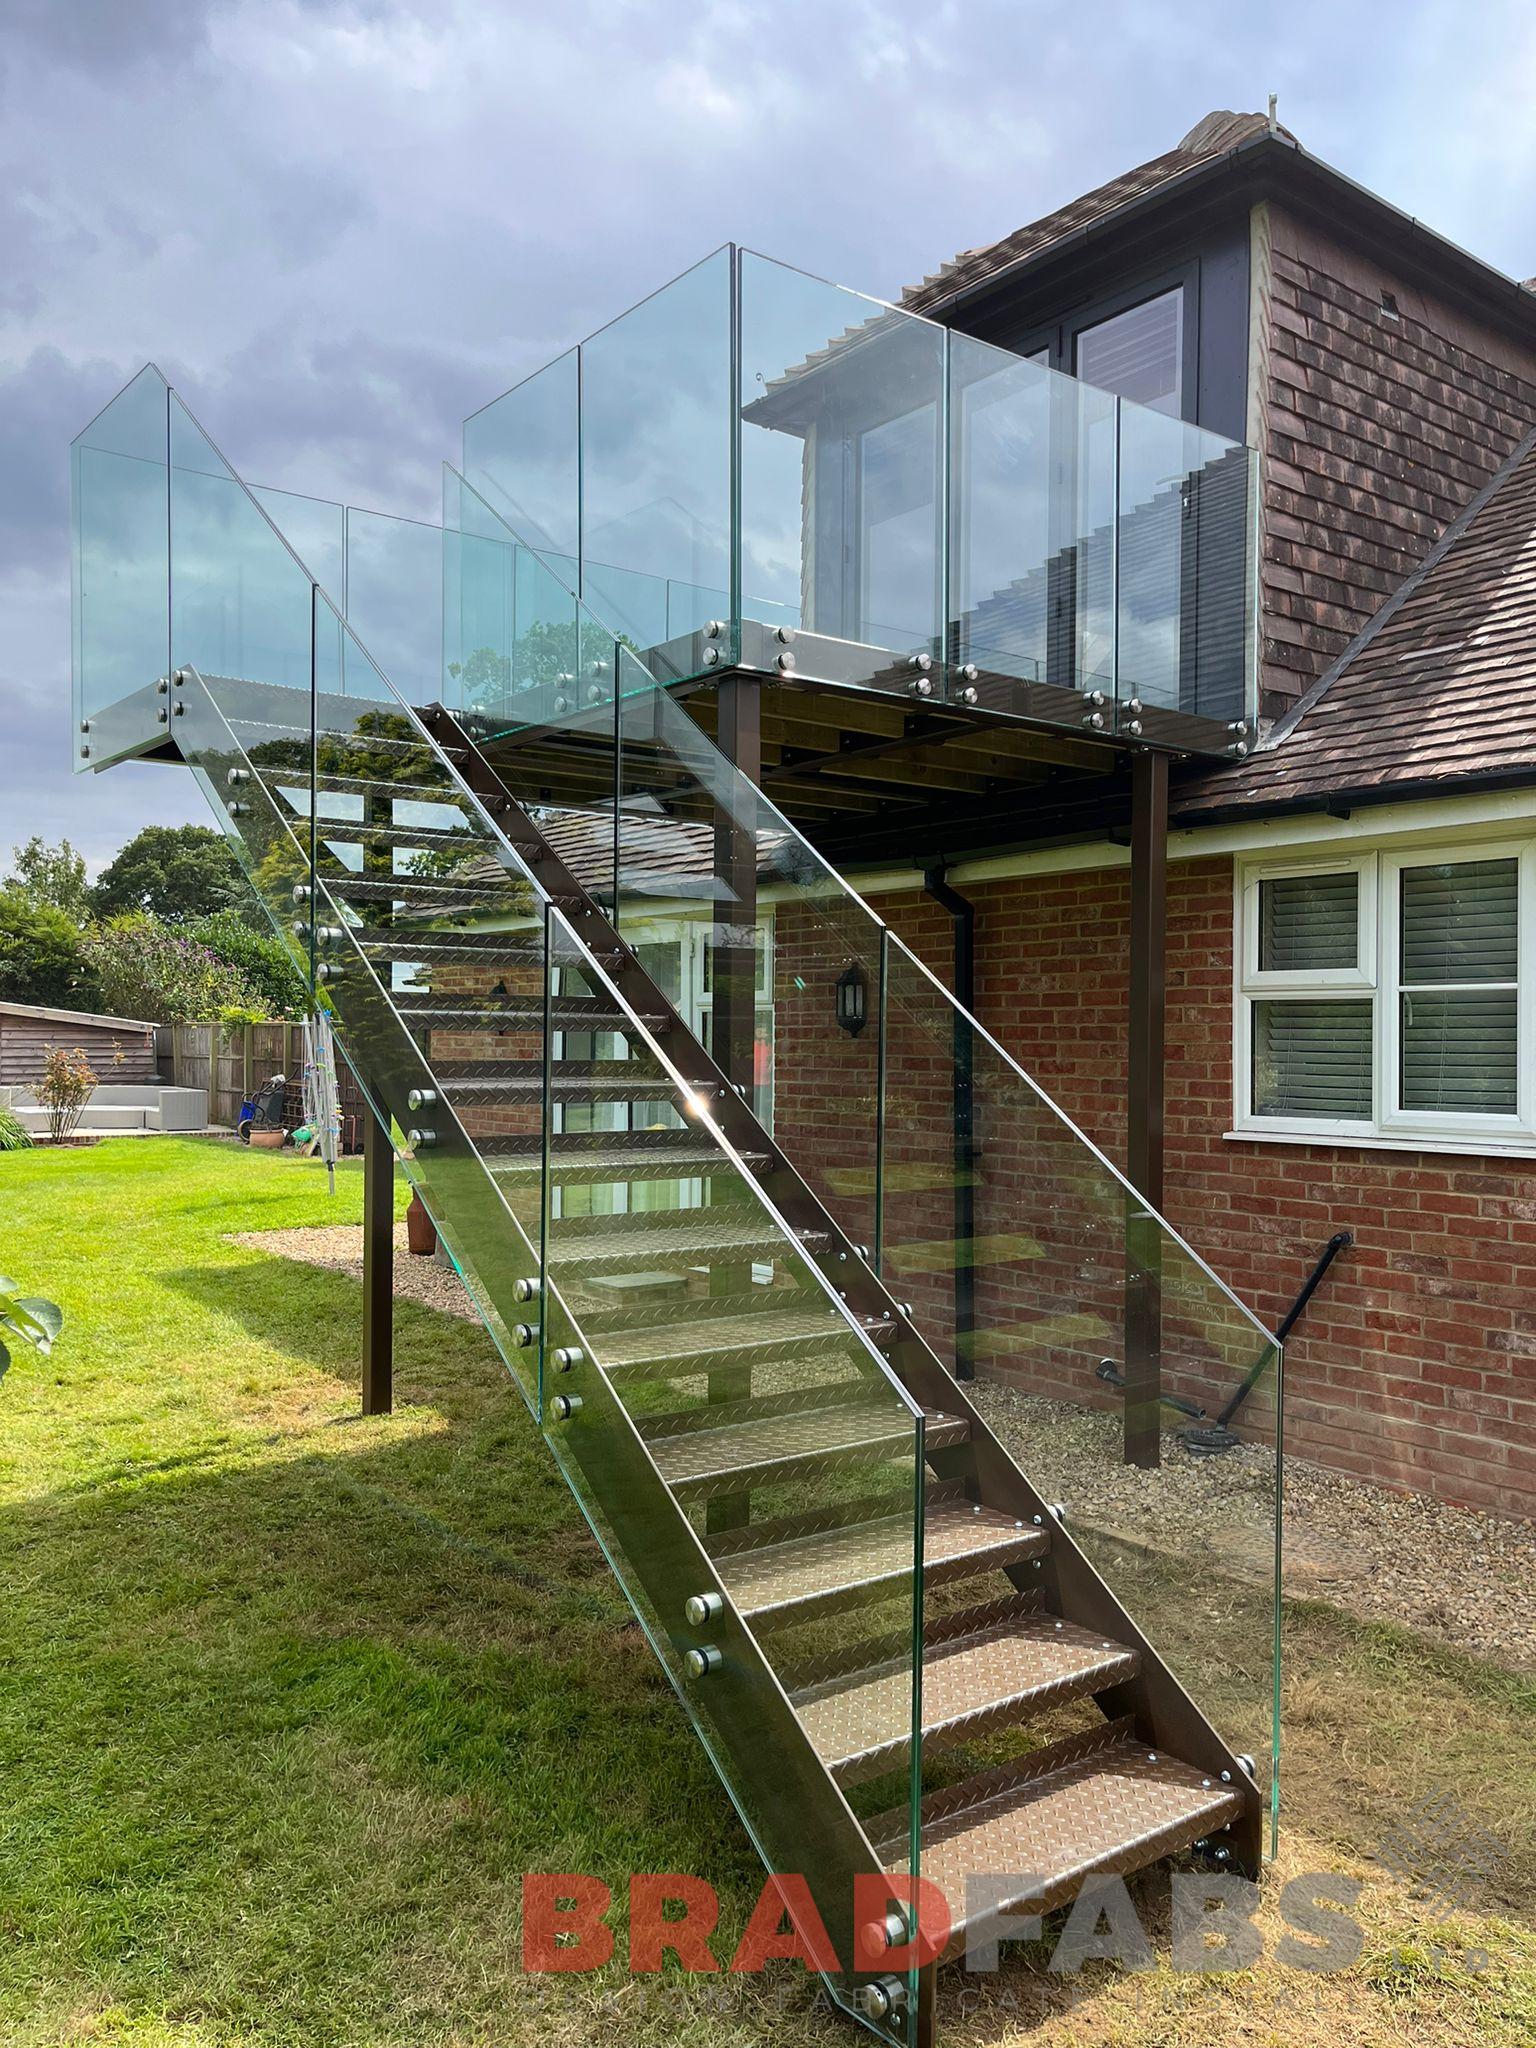 Bradfabs staircase, external steel staircase from a bespoke balcony  